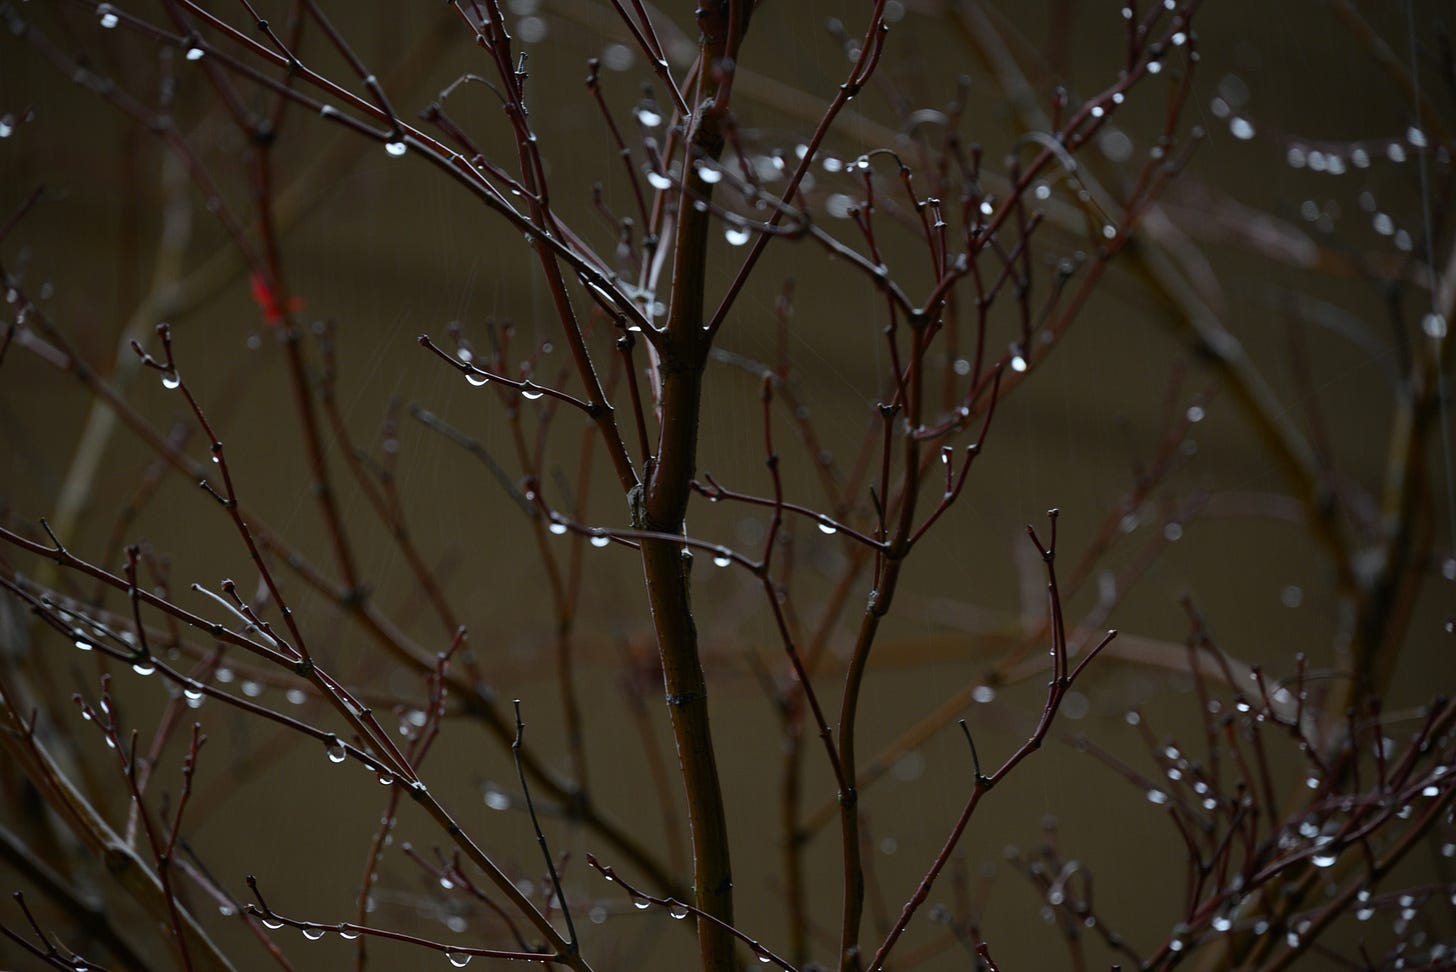 Raindrops cling to bare branches with a single small red leaf visible on the left